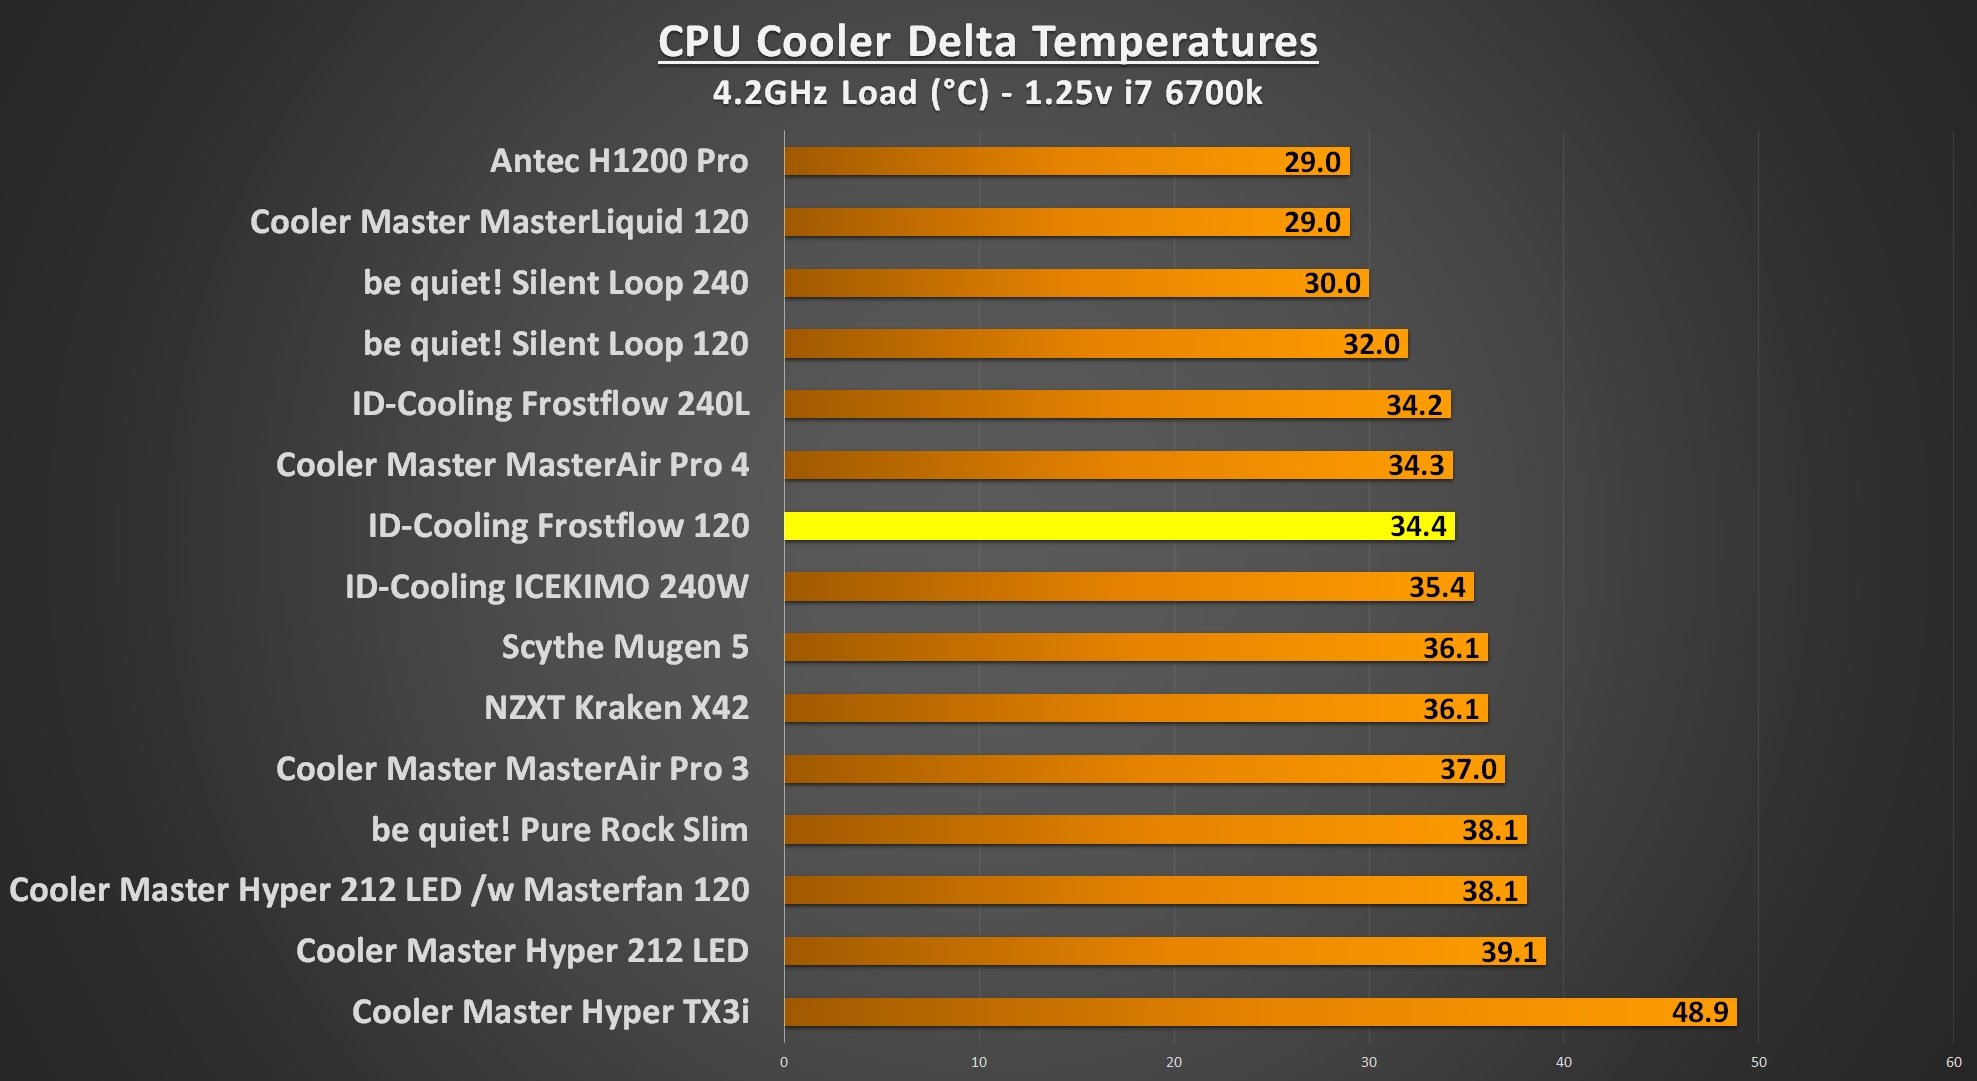 ID-Cooling Frostflow 4.2Ghz Load